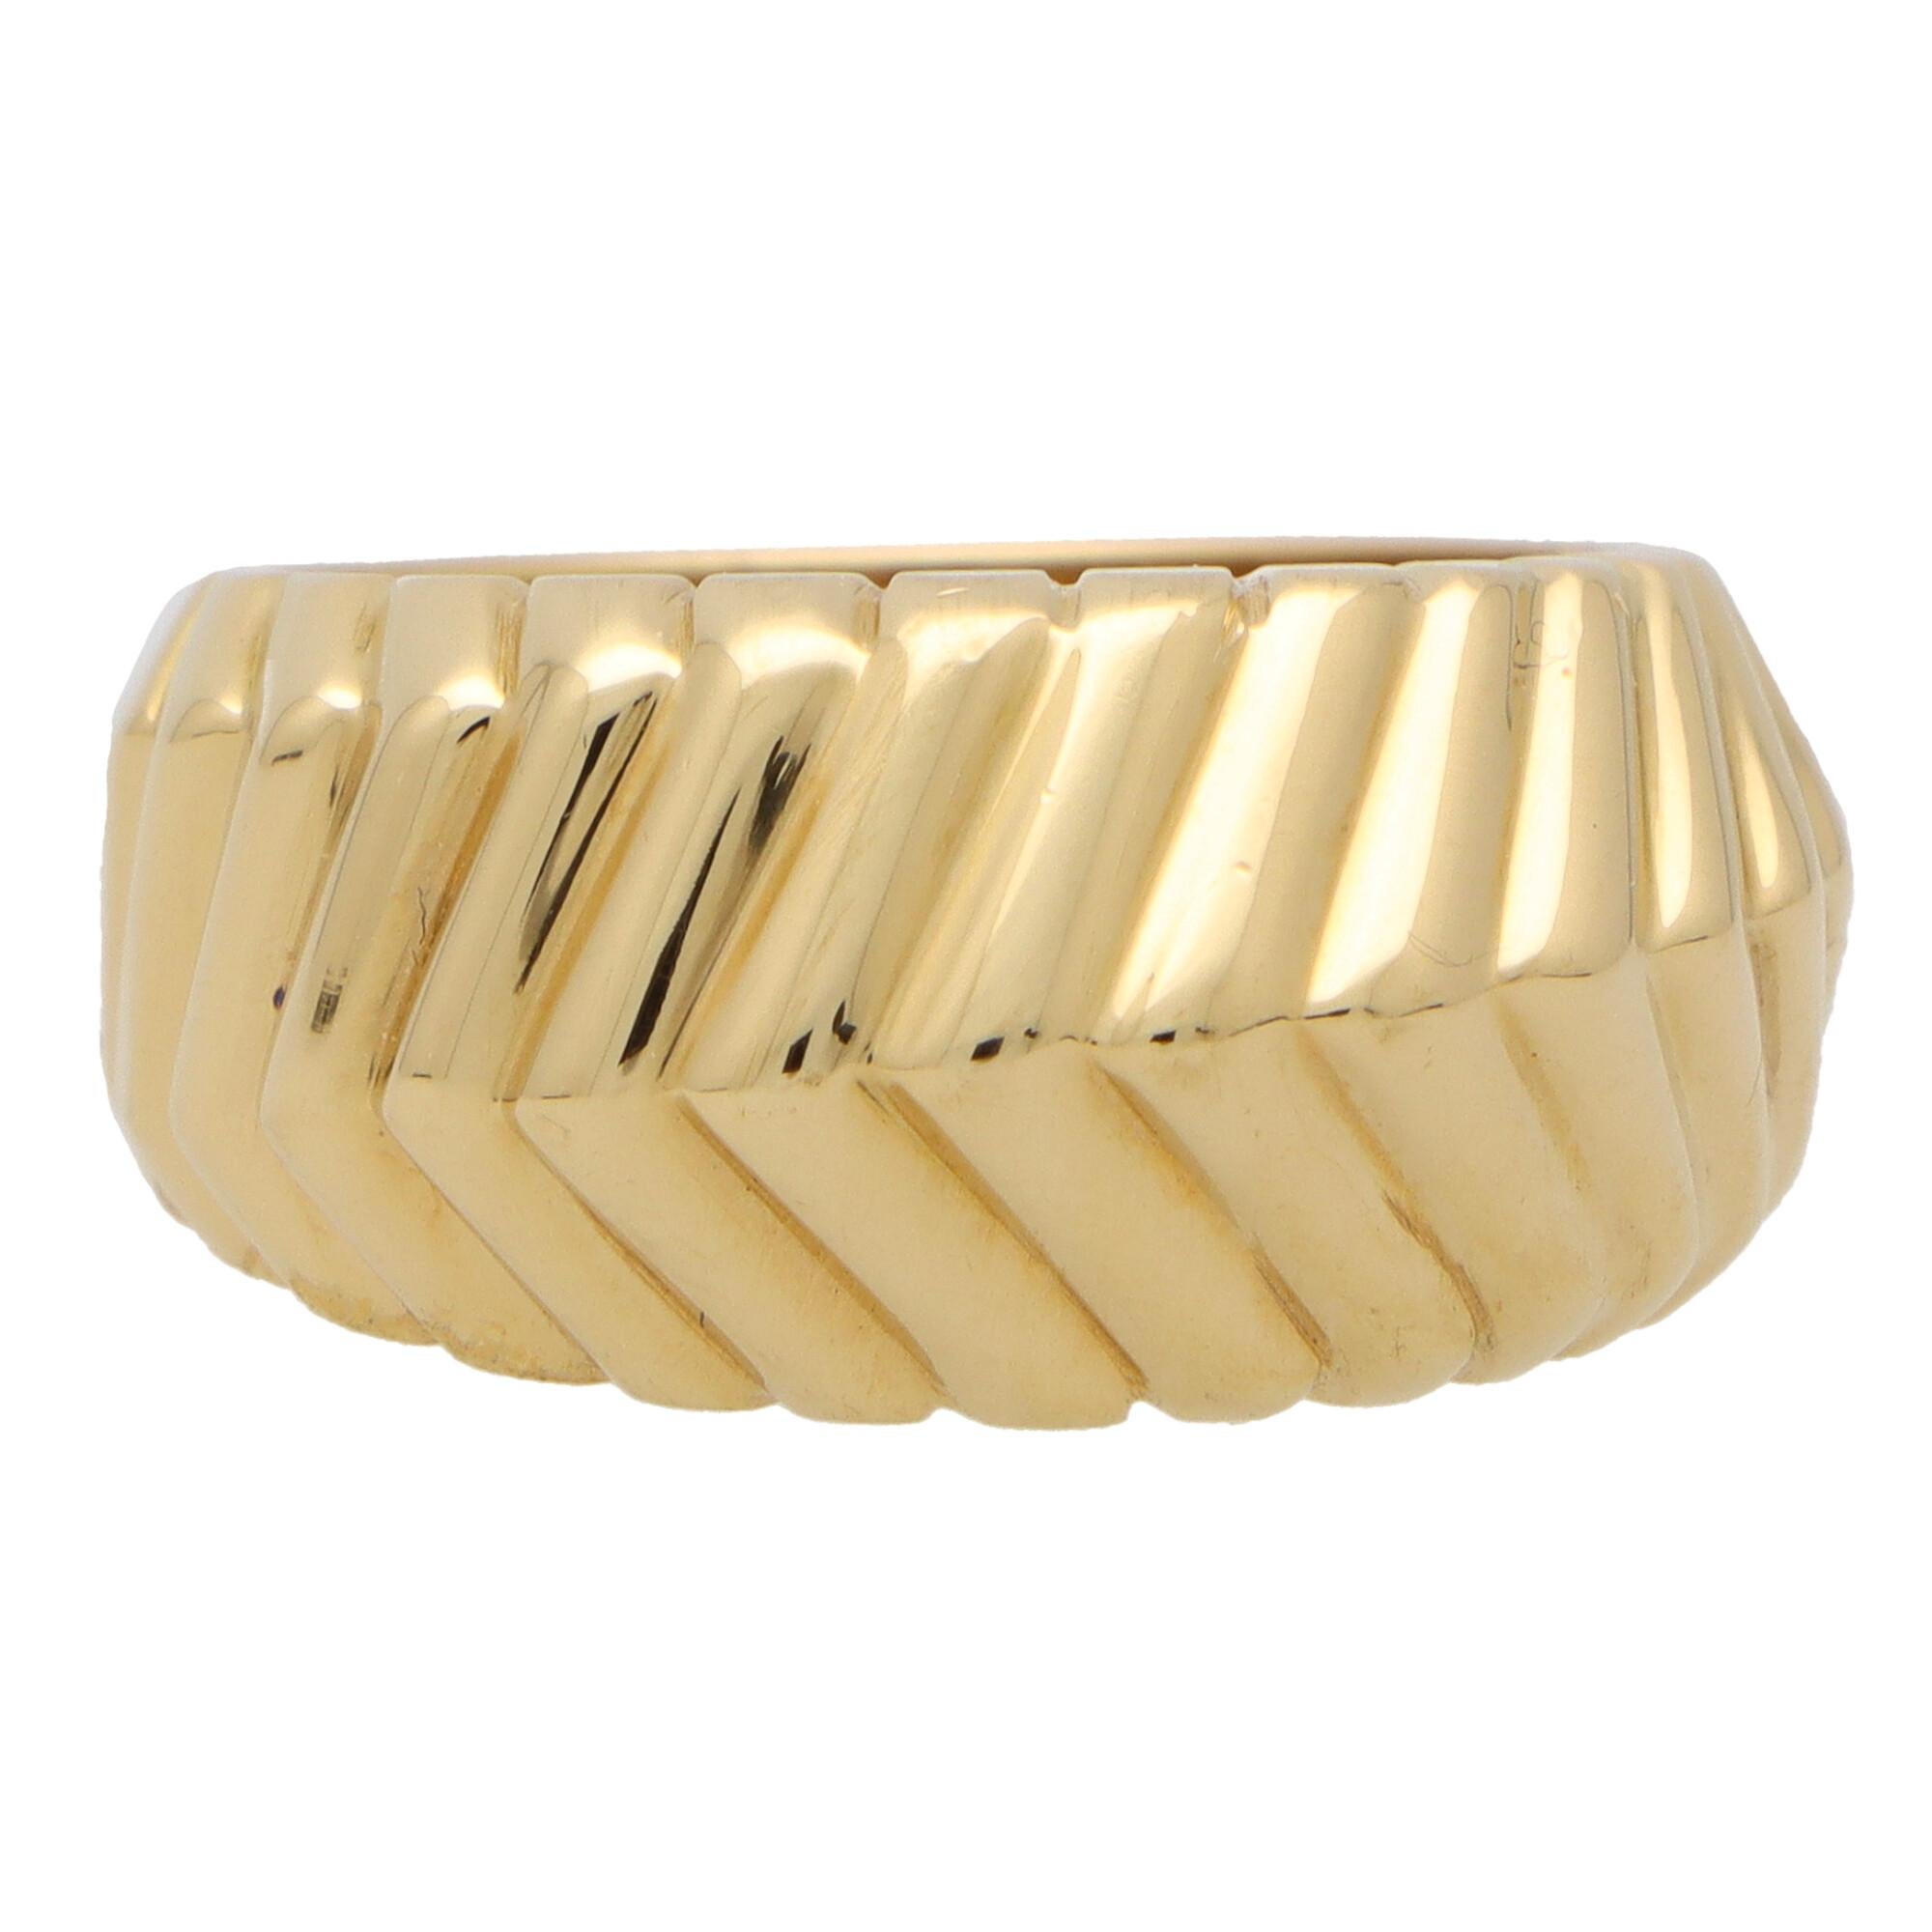 A beautiful vintage Tiffany & Co. 'Cordis' chevron bombe ring set in 18k yellow gold. 

From the now discontinued 'Cordis' collection, the piece is composed in a bombe style with a raised chevron design. The chevron design travels across the band